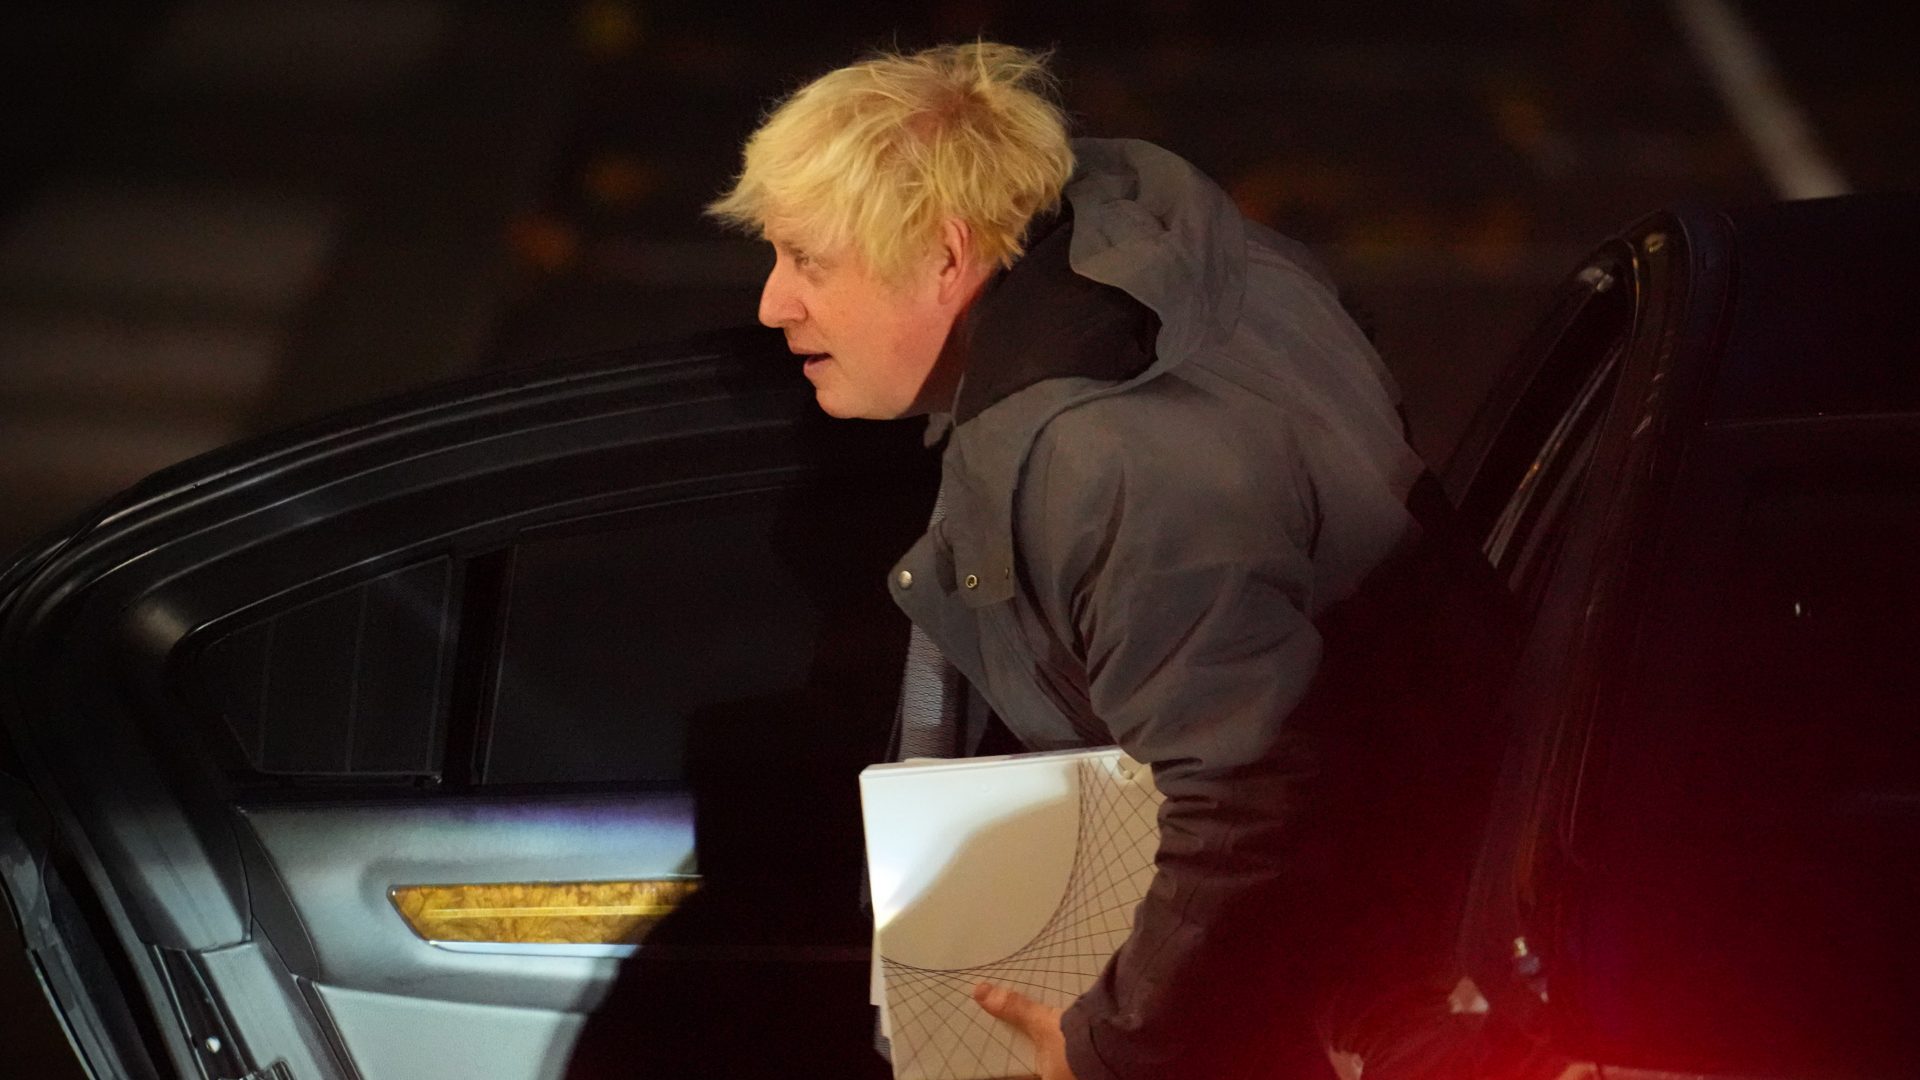 Boris Johnson arrives to testify at the Covid Inquiry (Photo by Carl Court/Getty Images)